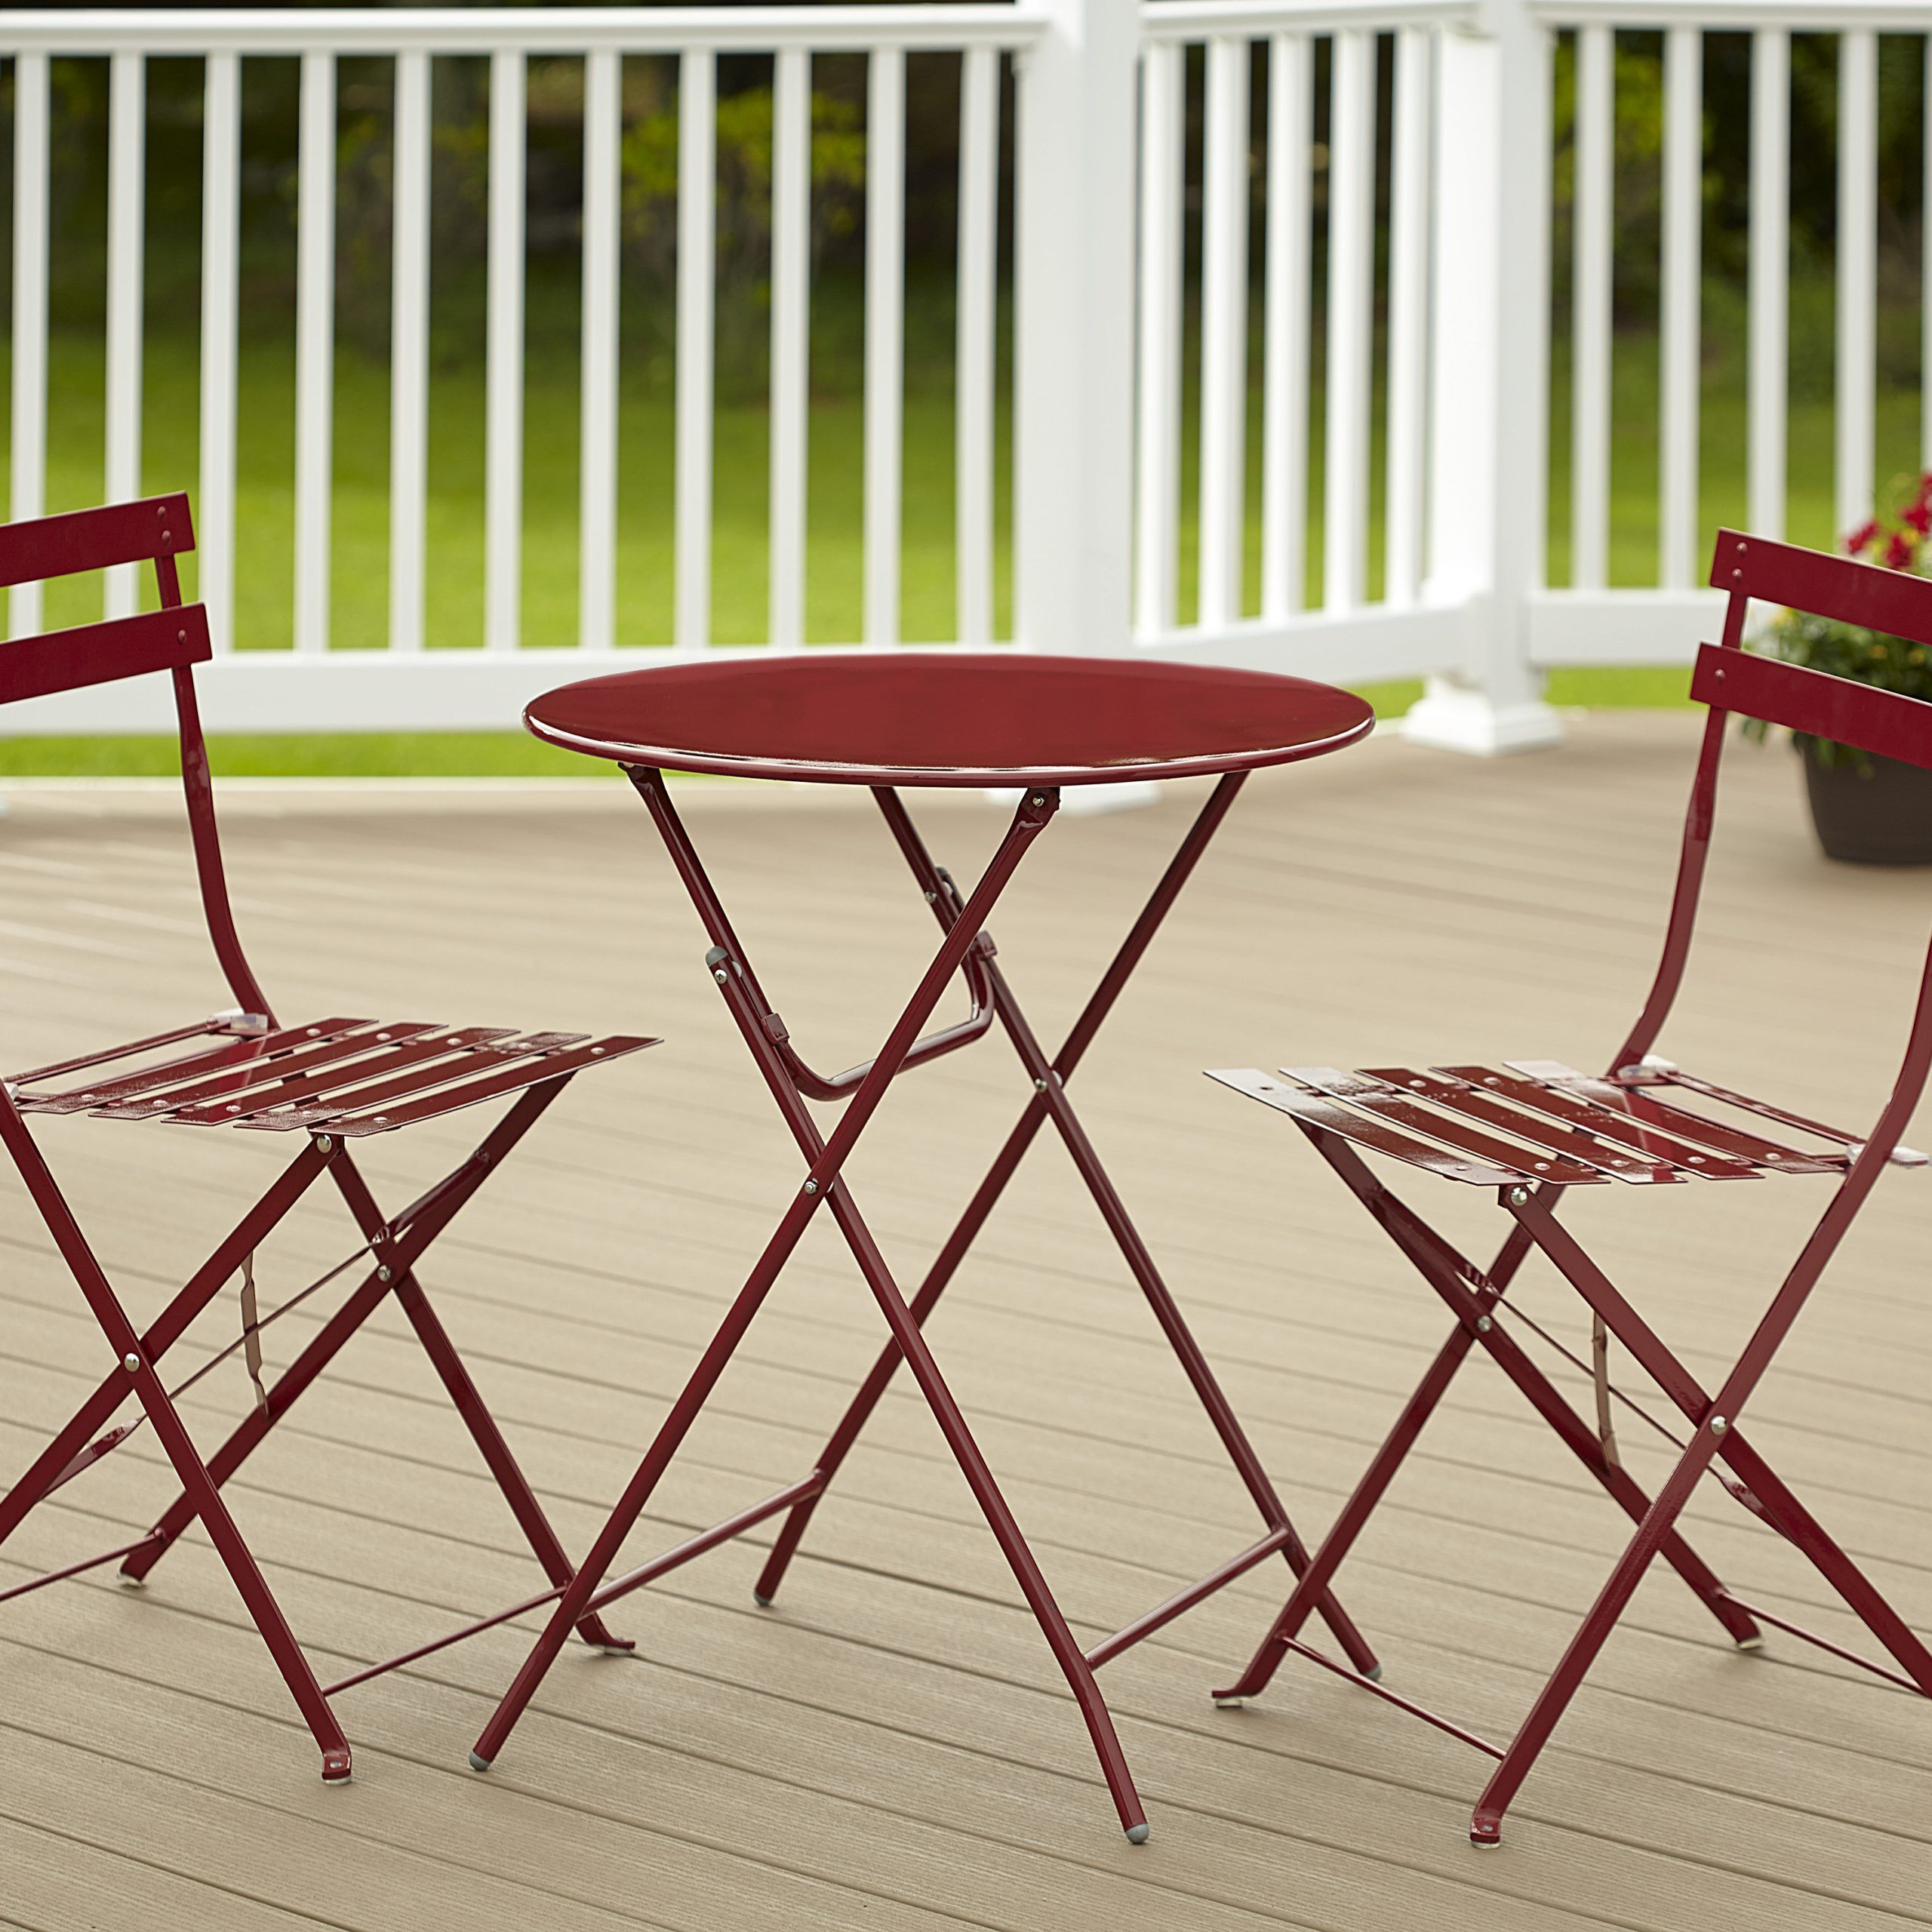 3 Pc Folding Bistro Patio Table And Chairs  Red Within Trendy Red Metal Outdoor Table And Chairs Sets (View 10 of 15)